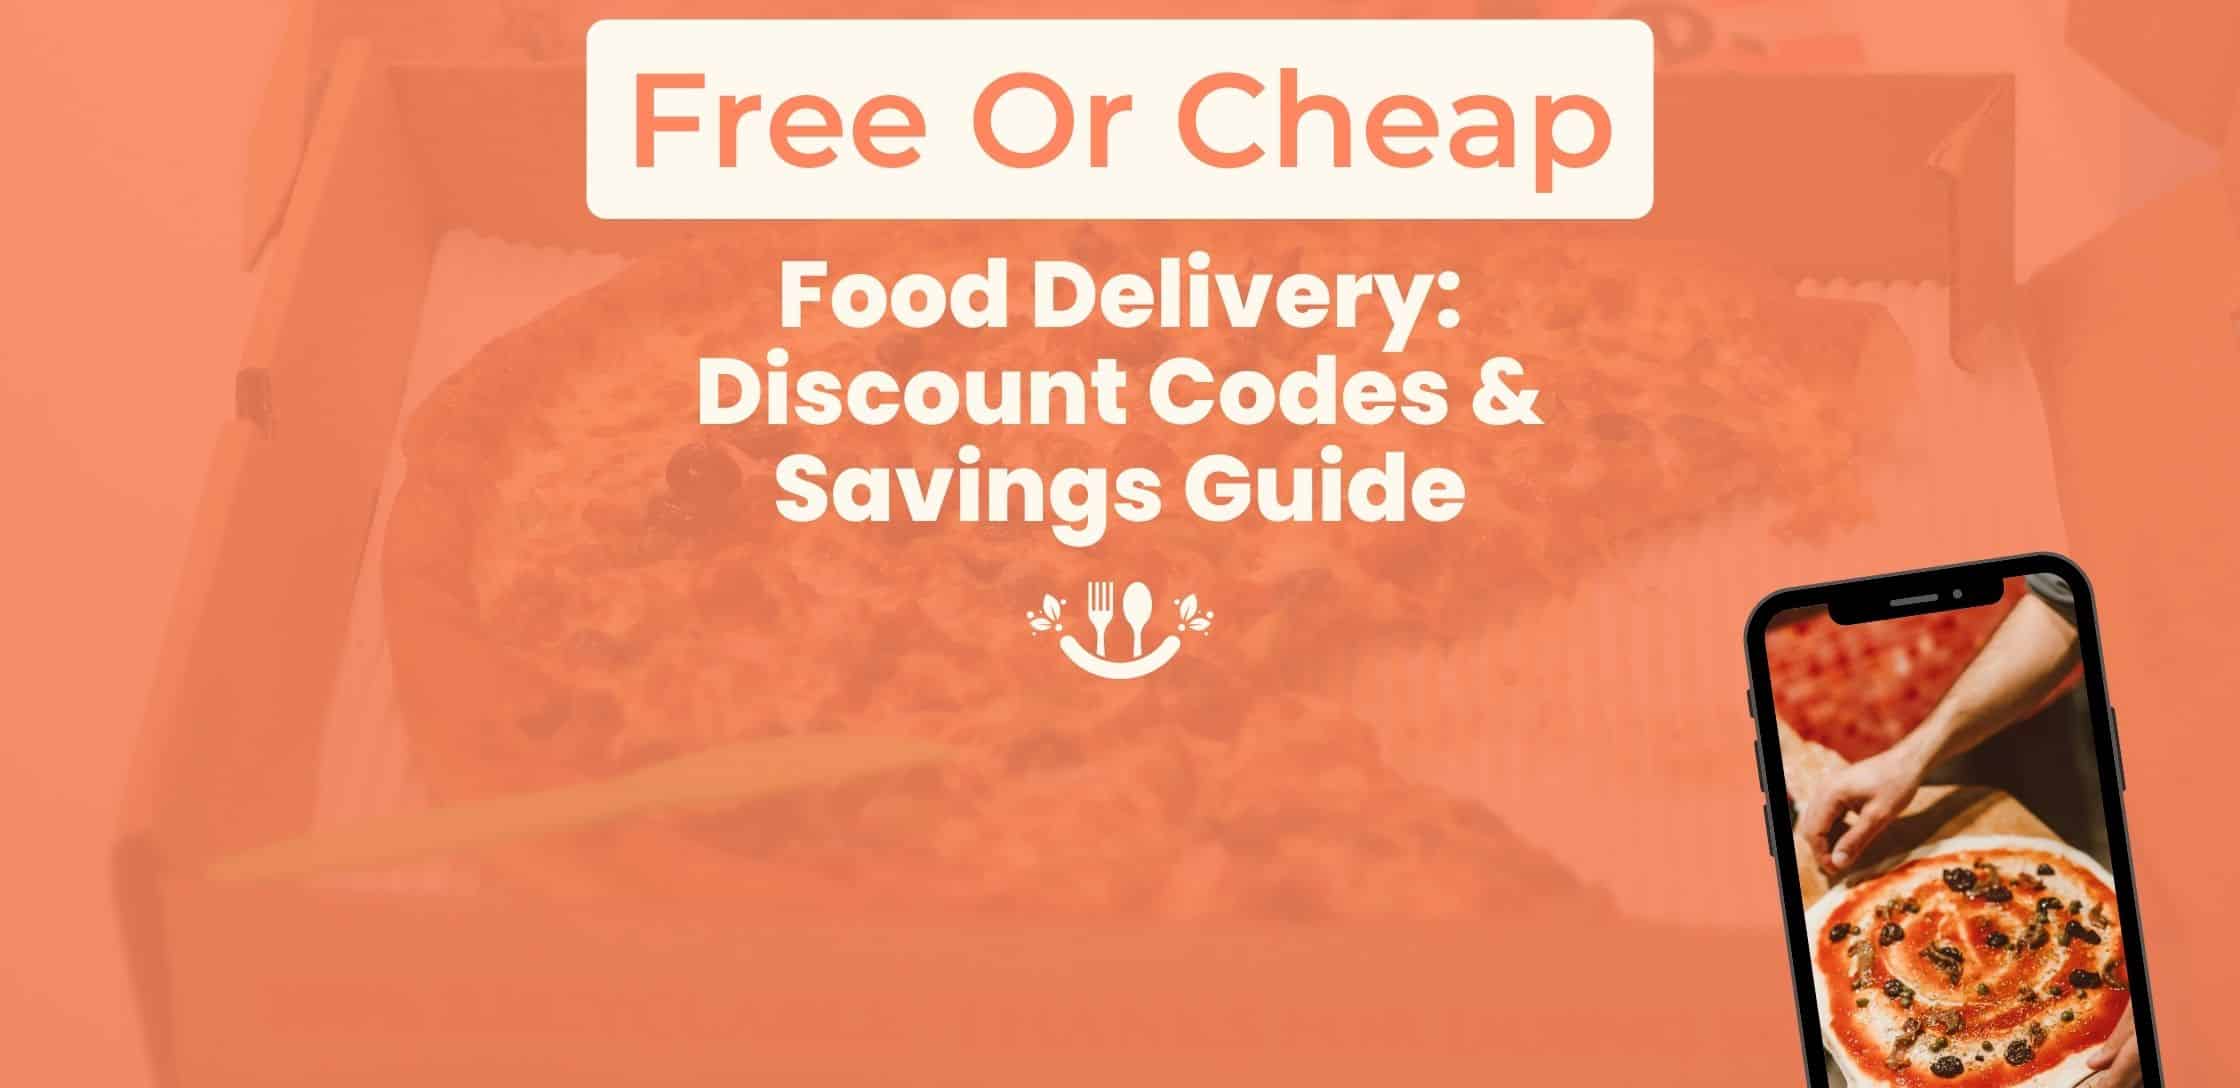 Discount codes for online ethnic food orders